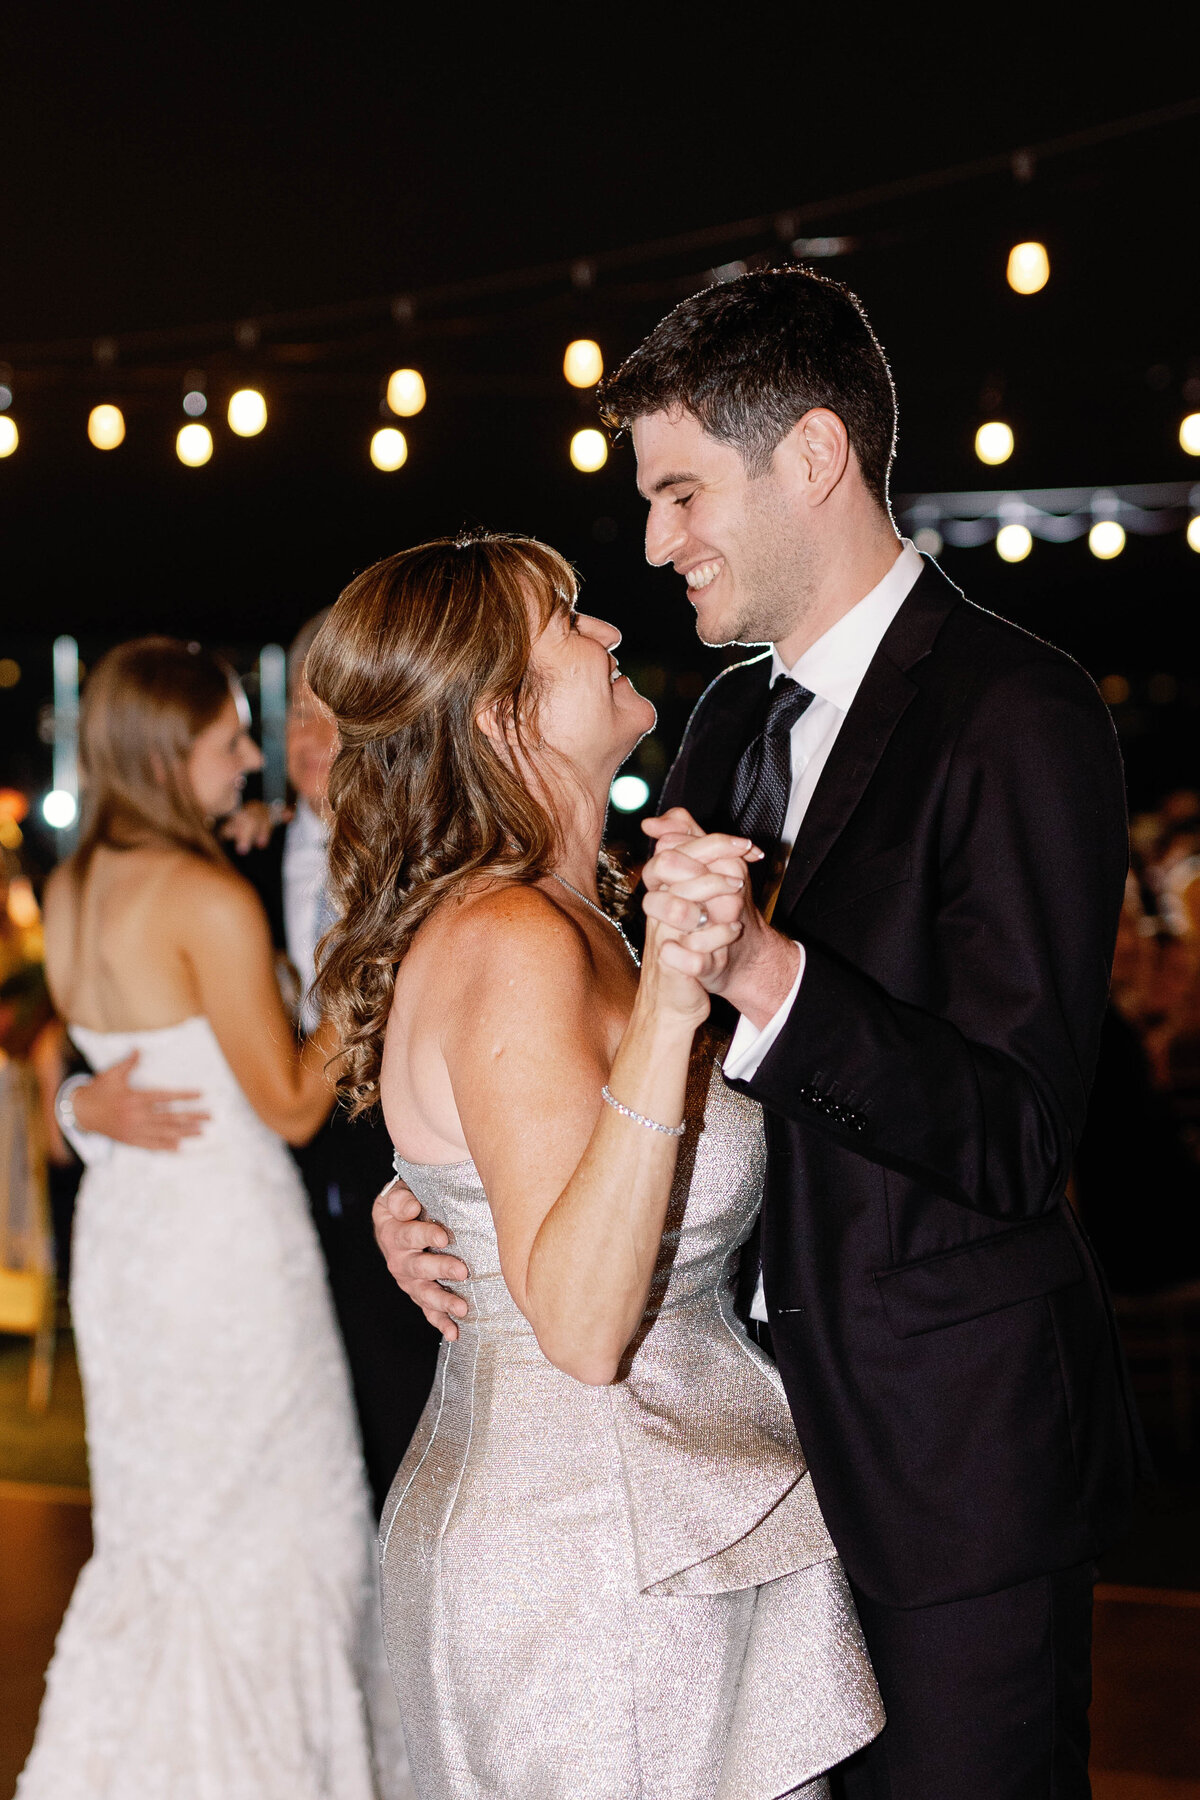 mother-son-wedding-dance-at-the-london-west-hollywood